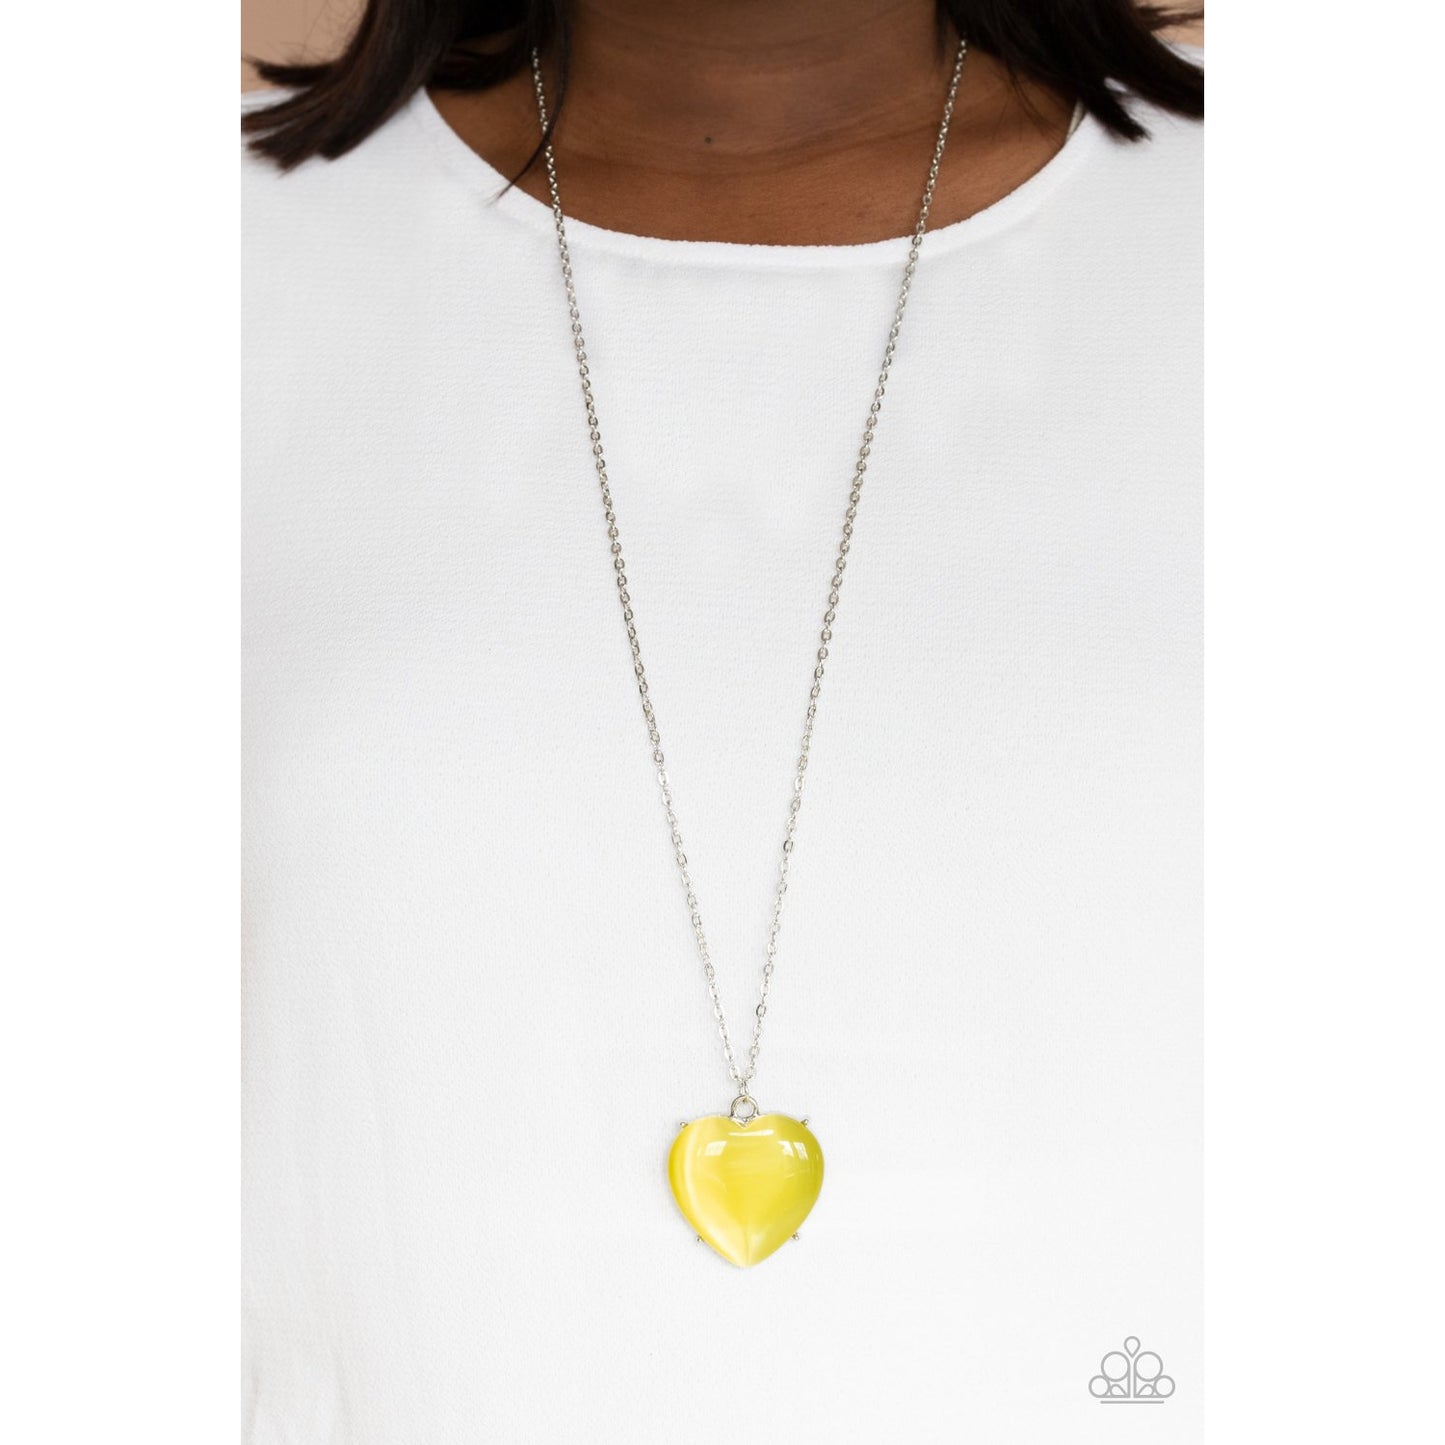 Warmhearted Glow - Yellow Cat's Eye Stone Necklace - Paparazzi Accessories - GlaMarous Titi Jewels